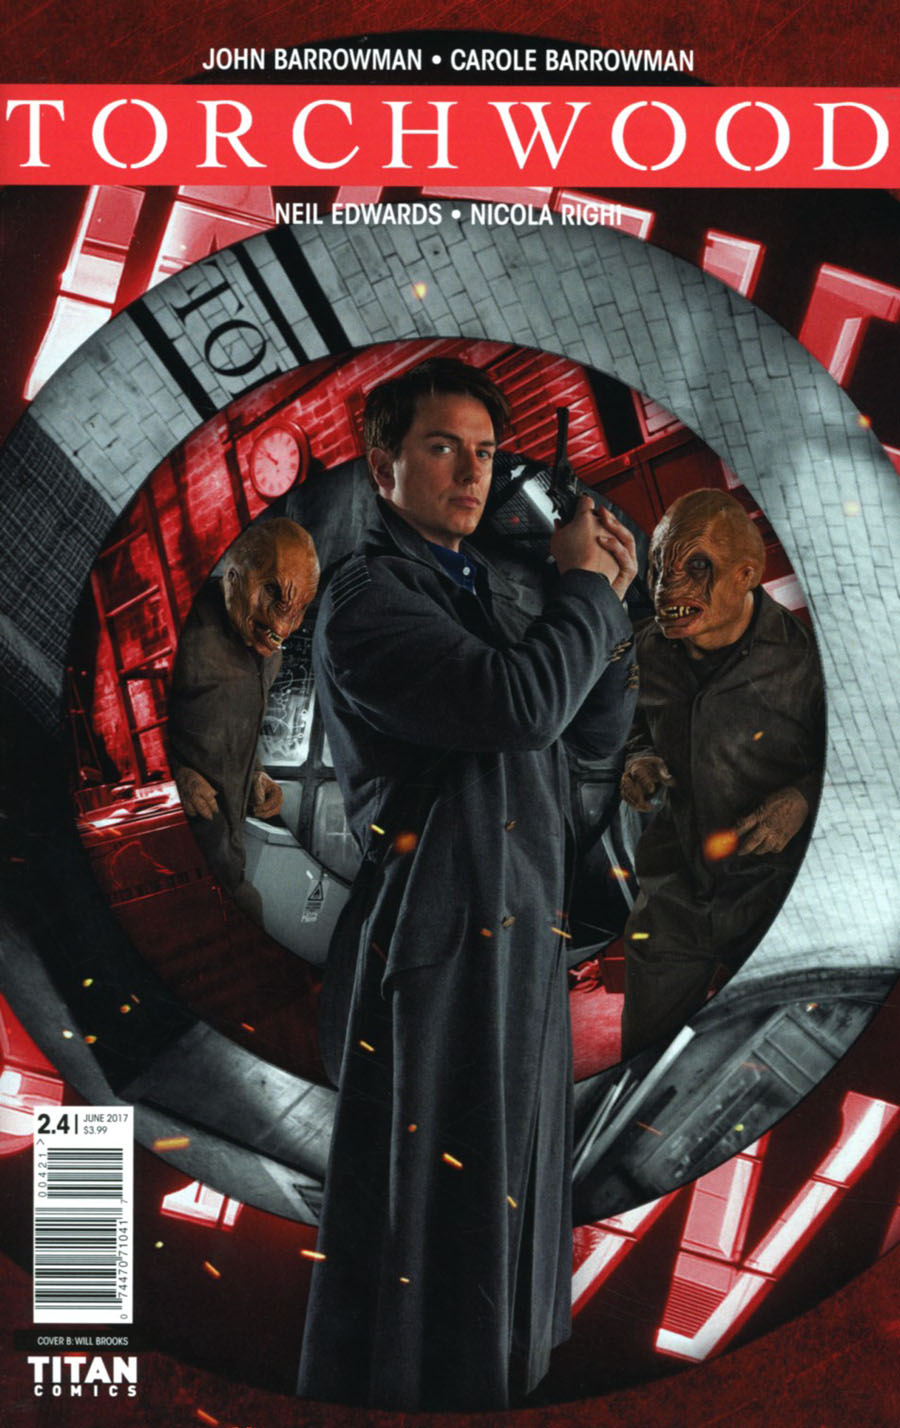 Torchwood Vol 3 #4 Cover B Variant Photo Cover